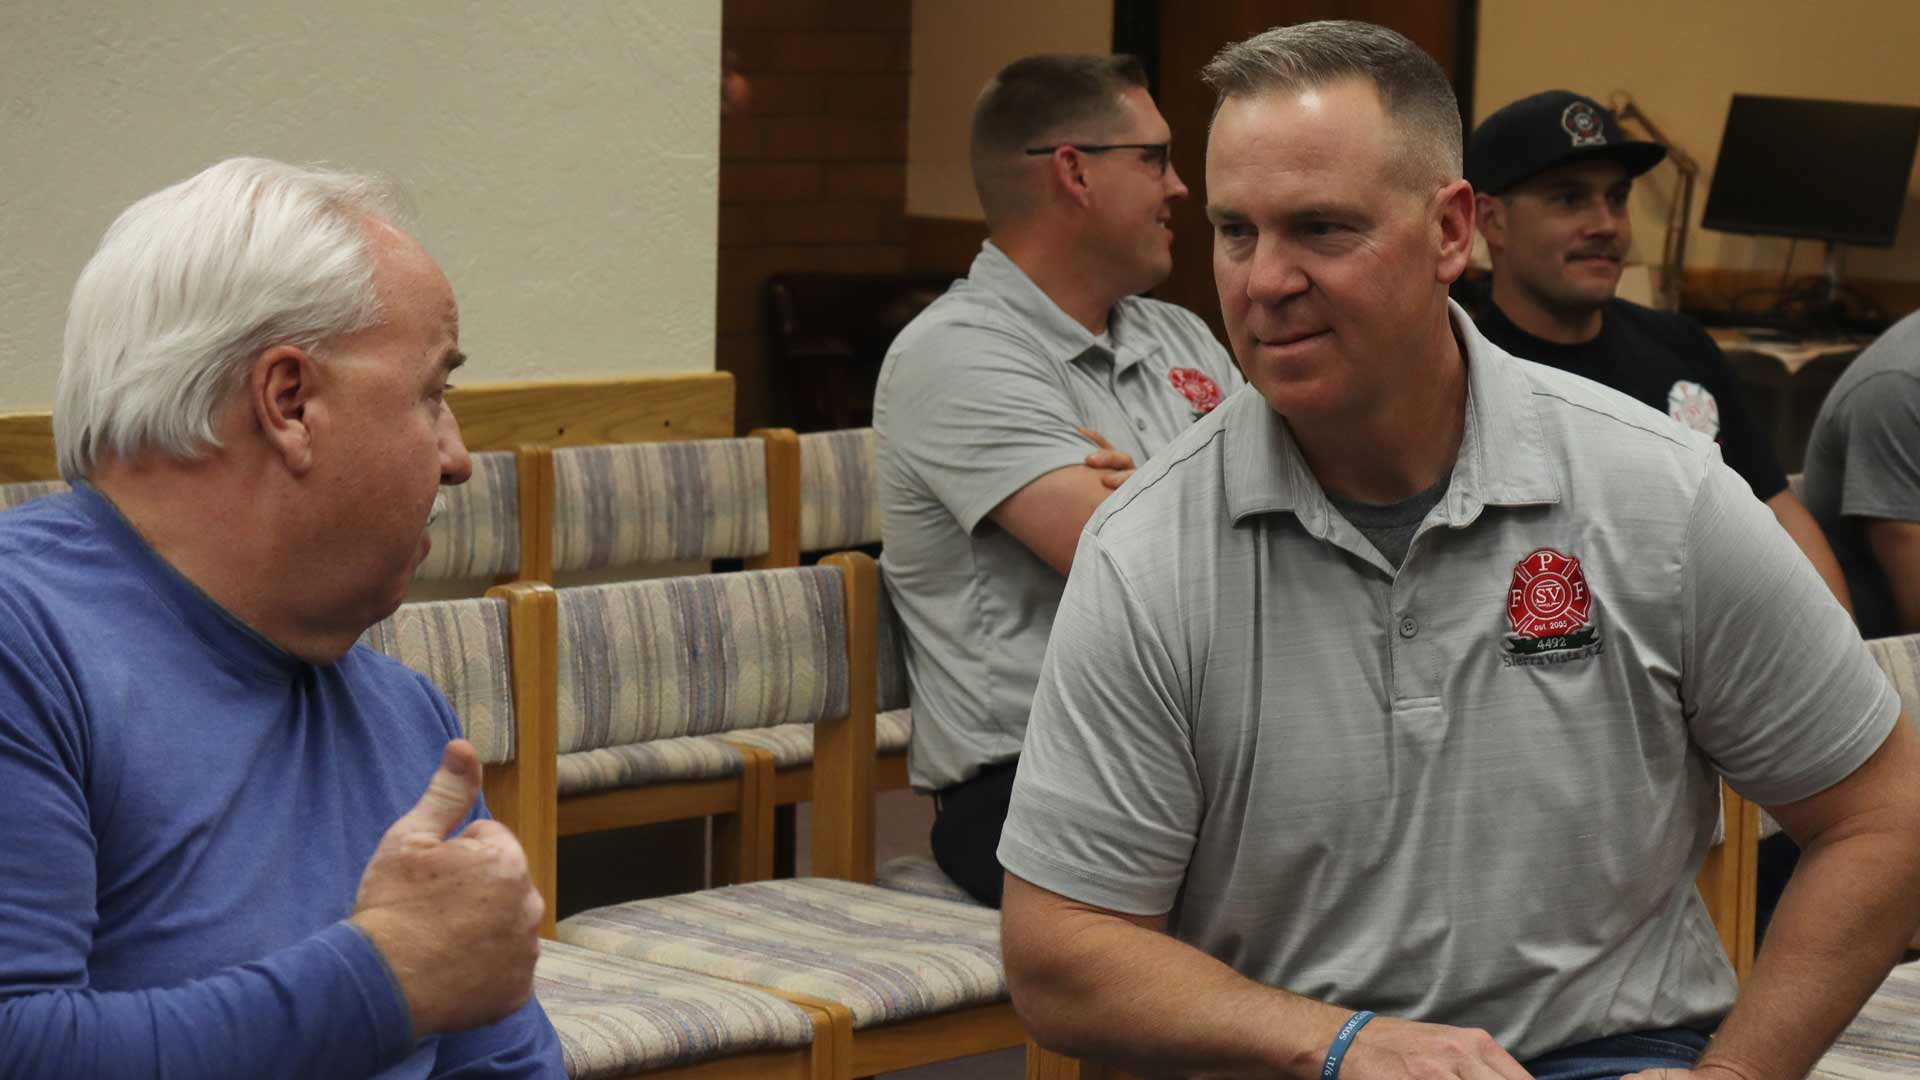 President of the Professional Firefighters of Sierra Vista Chris Klasen (right) talks with a member of the public during Thursday’s city council meeting.
